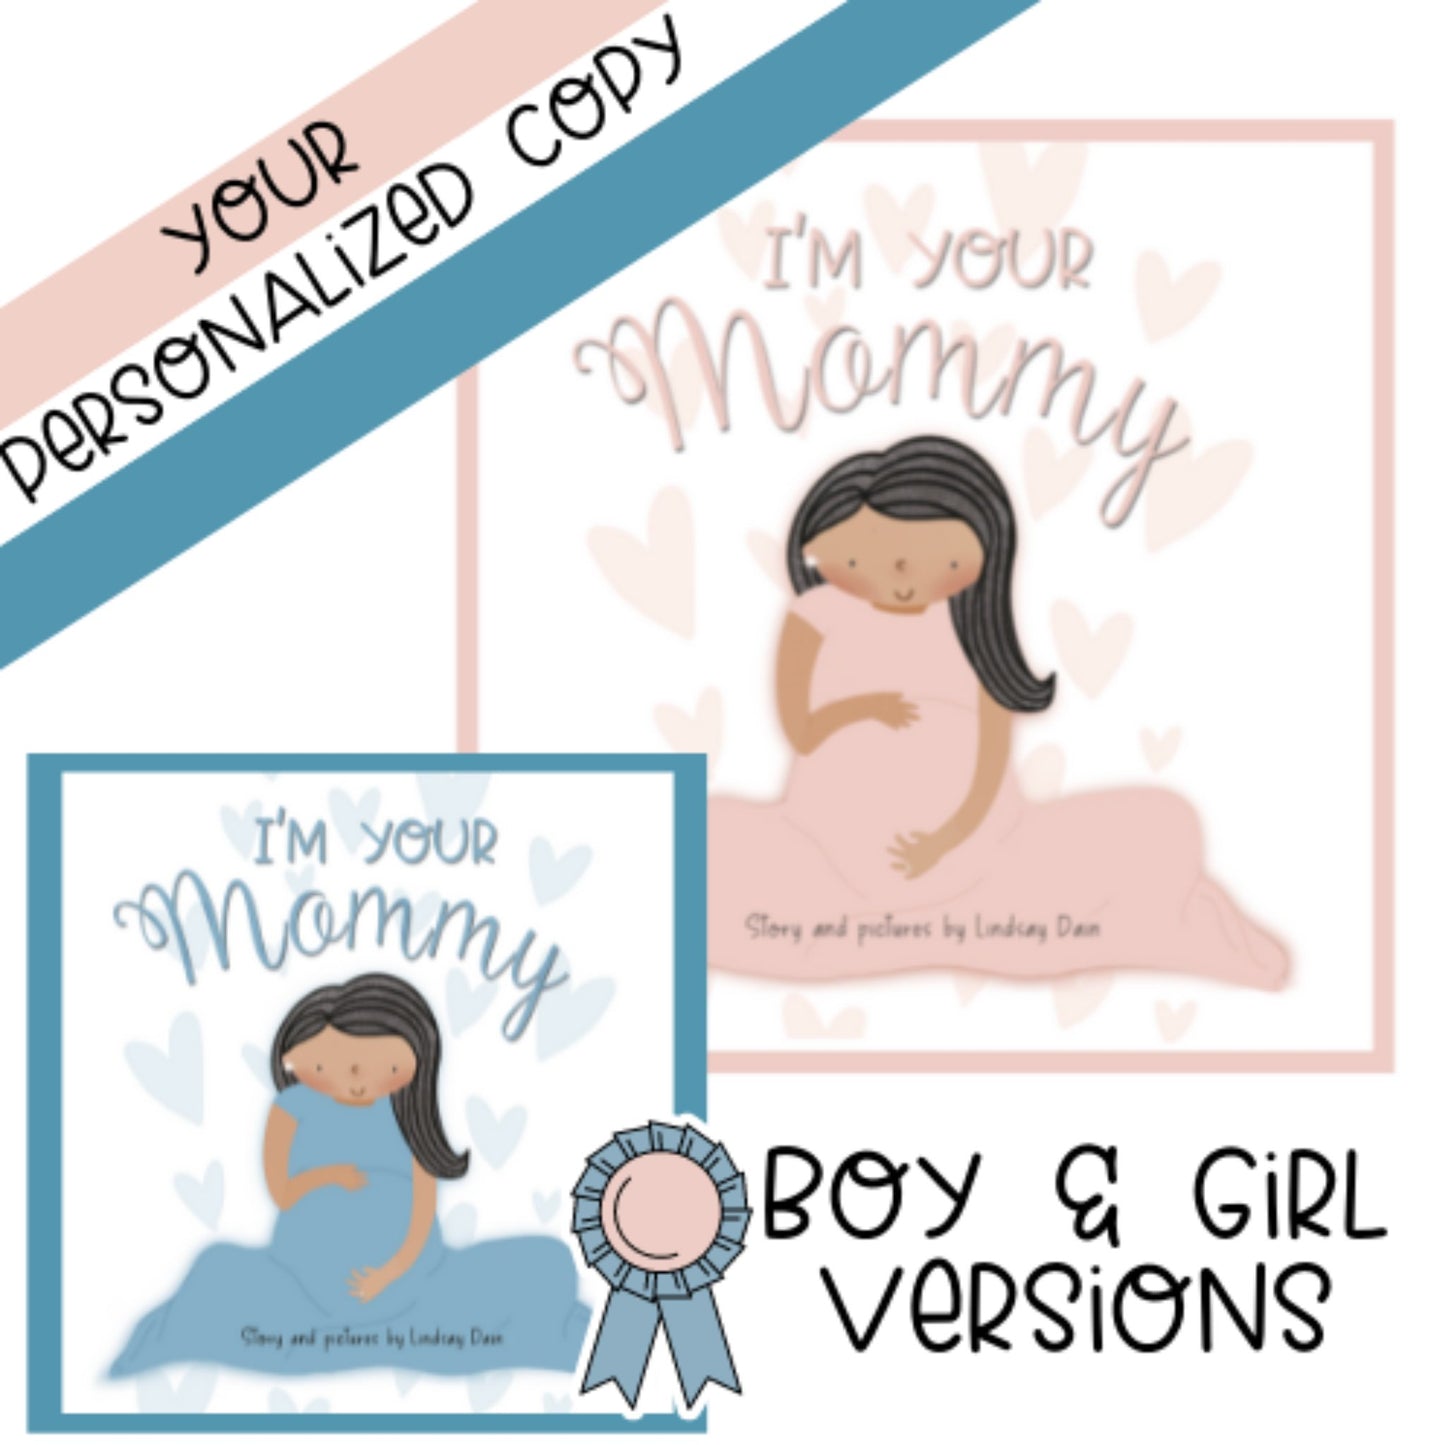 gift certificate examples of both boy and girls versions of the self-published personalized gift- a children’s picture book called “I’m Your Mommy”